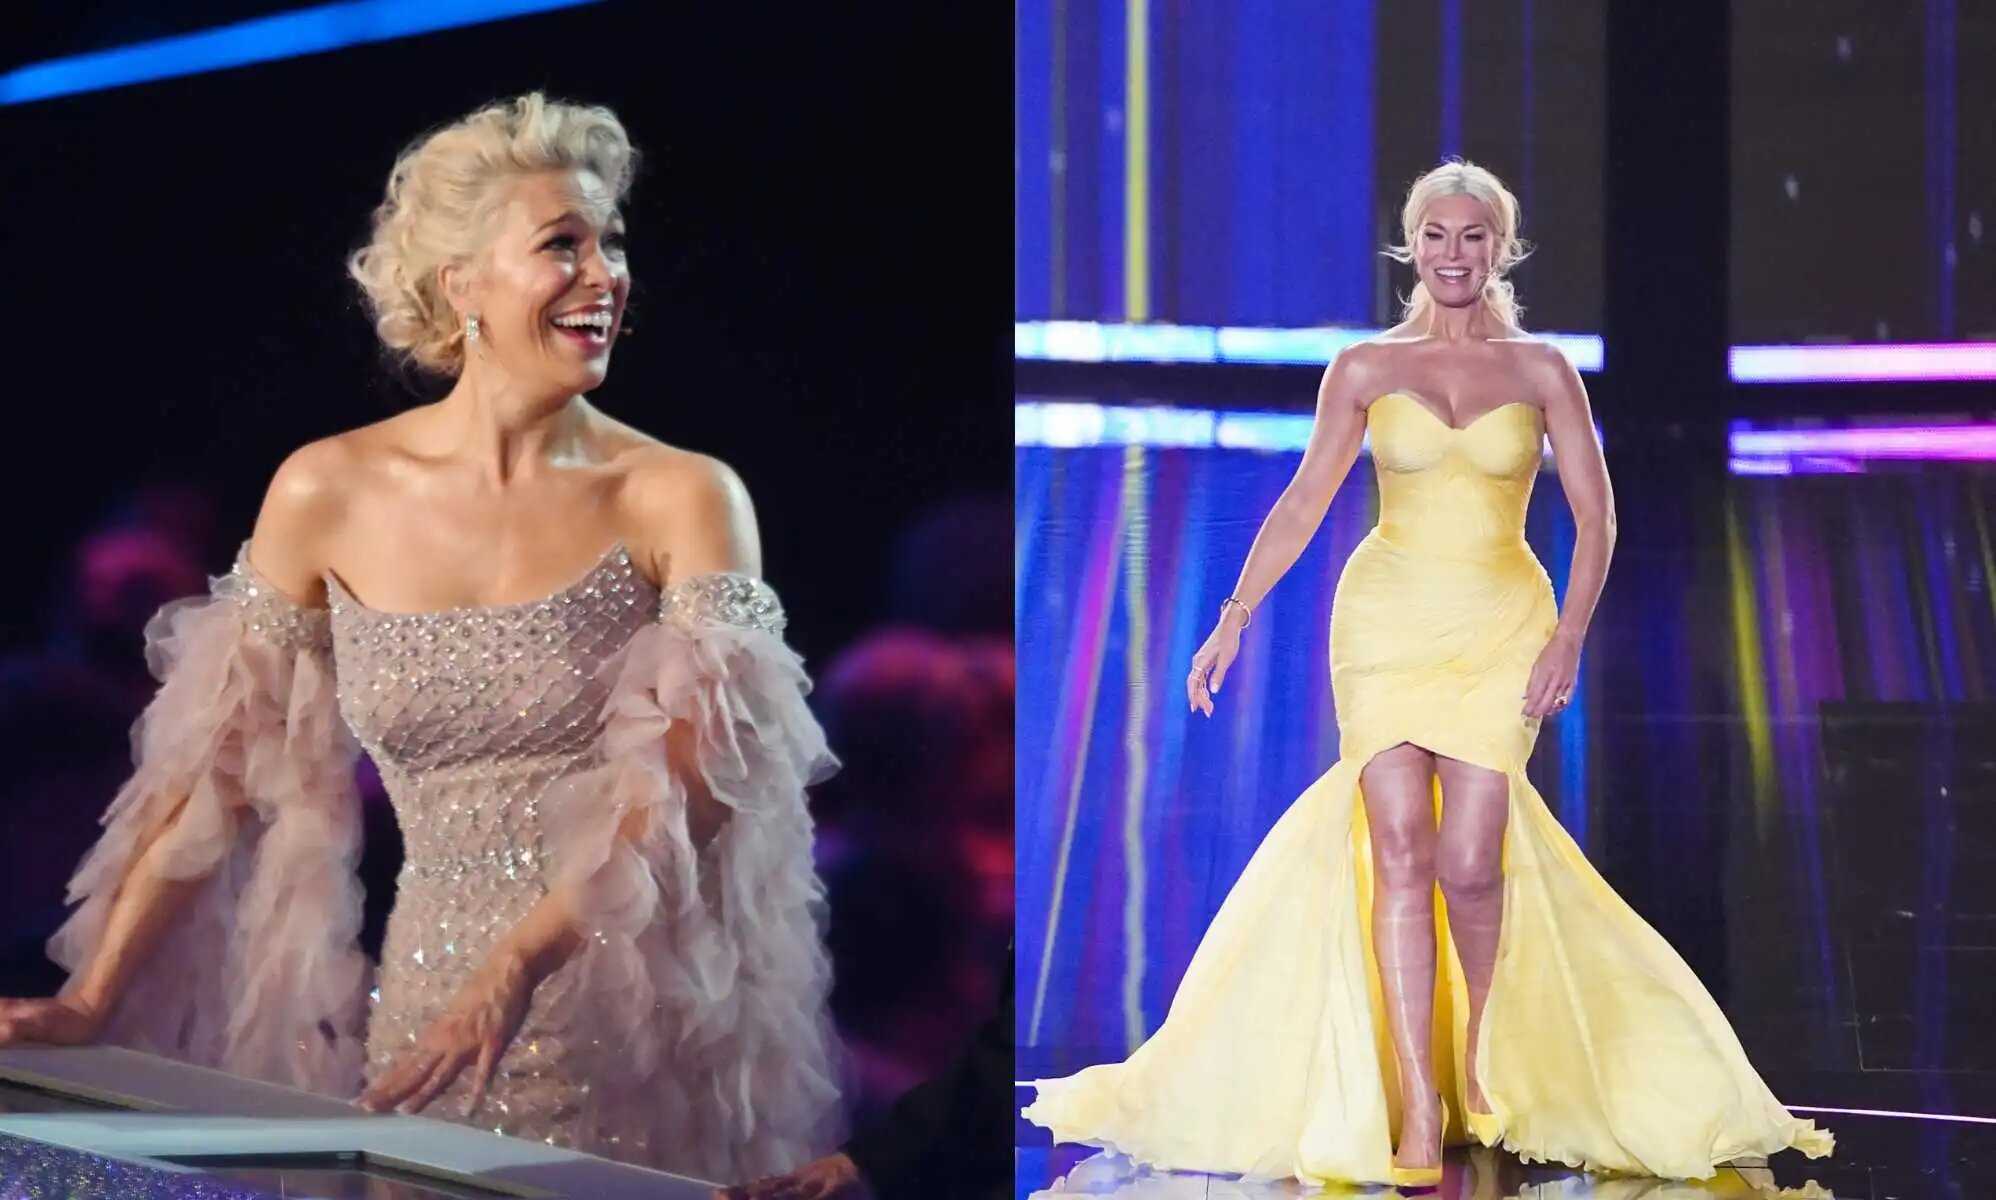 Ted Lasso star Hannah Waddingham joined forces with Ukraine at Eurovision 2023